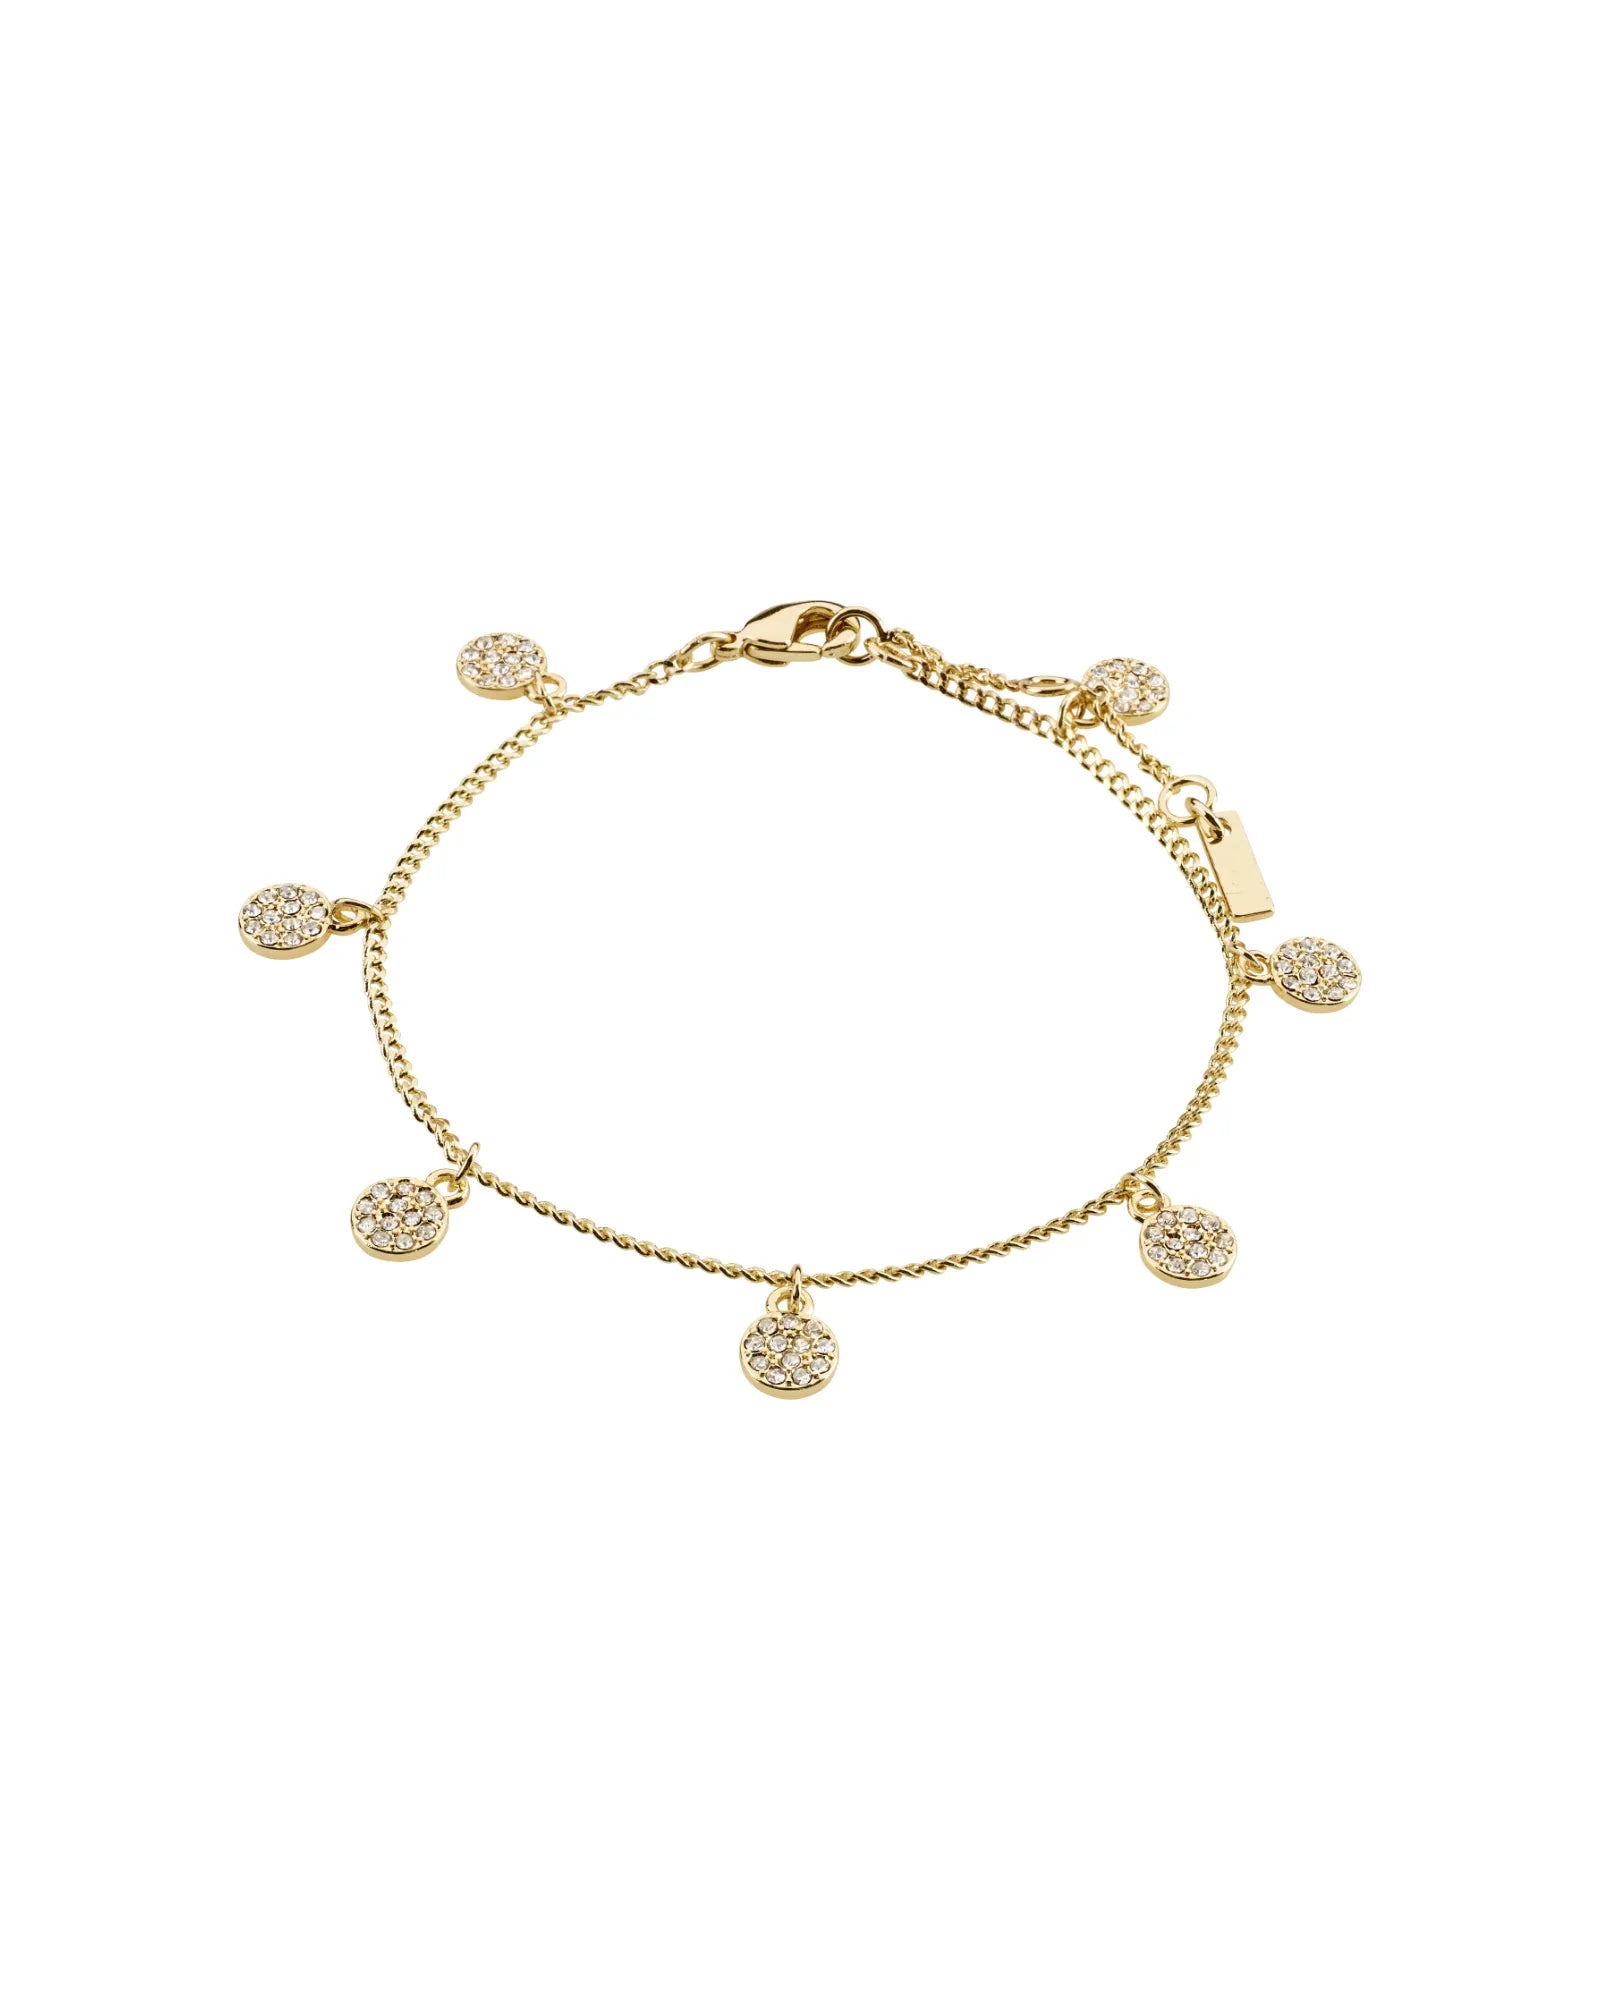 CHAYENNE Recycled Crystal Bracelet - Gold Plated